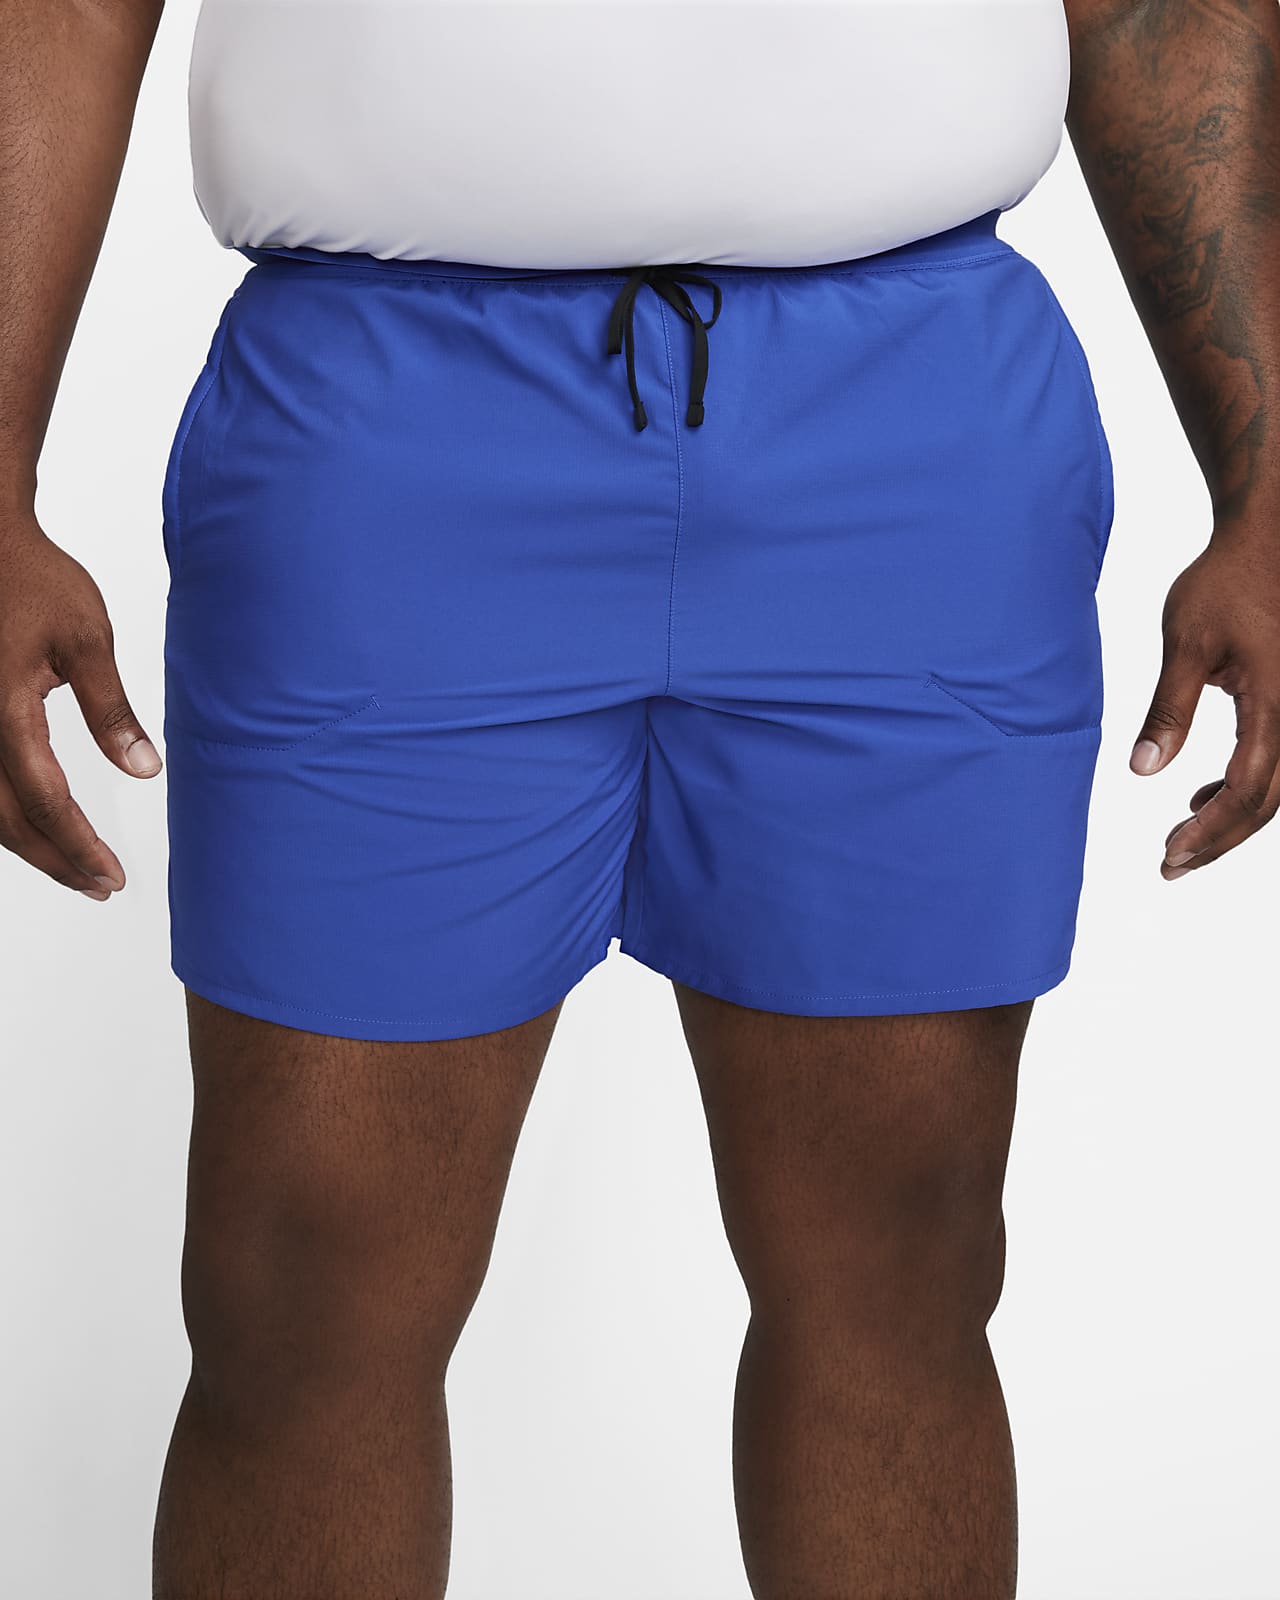 The best running shorts for men, by Nike. Nike CA